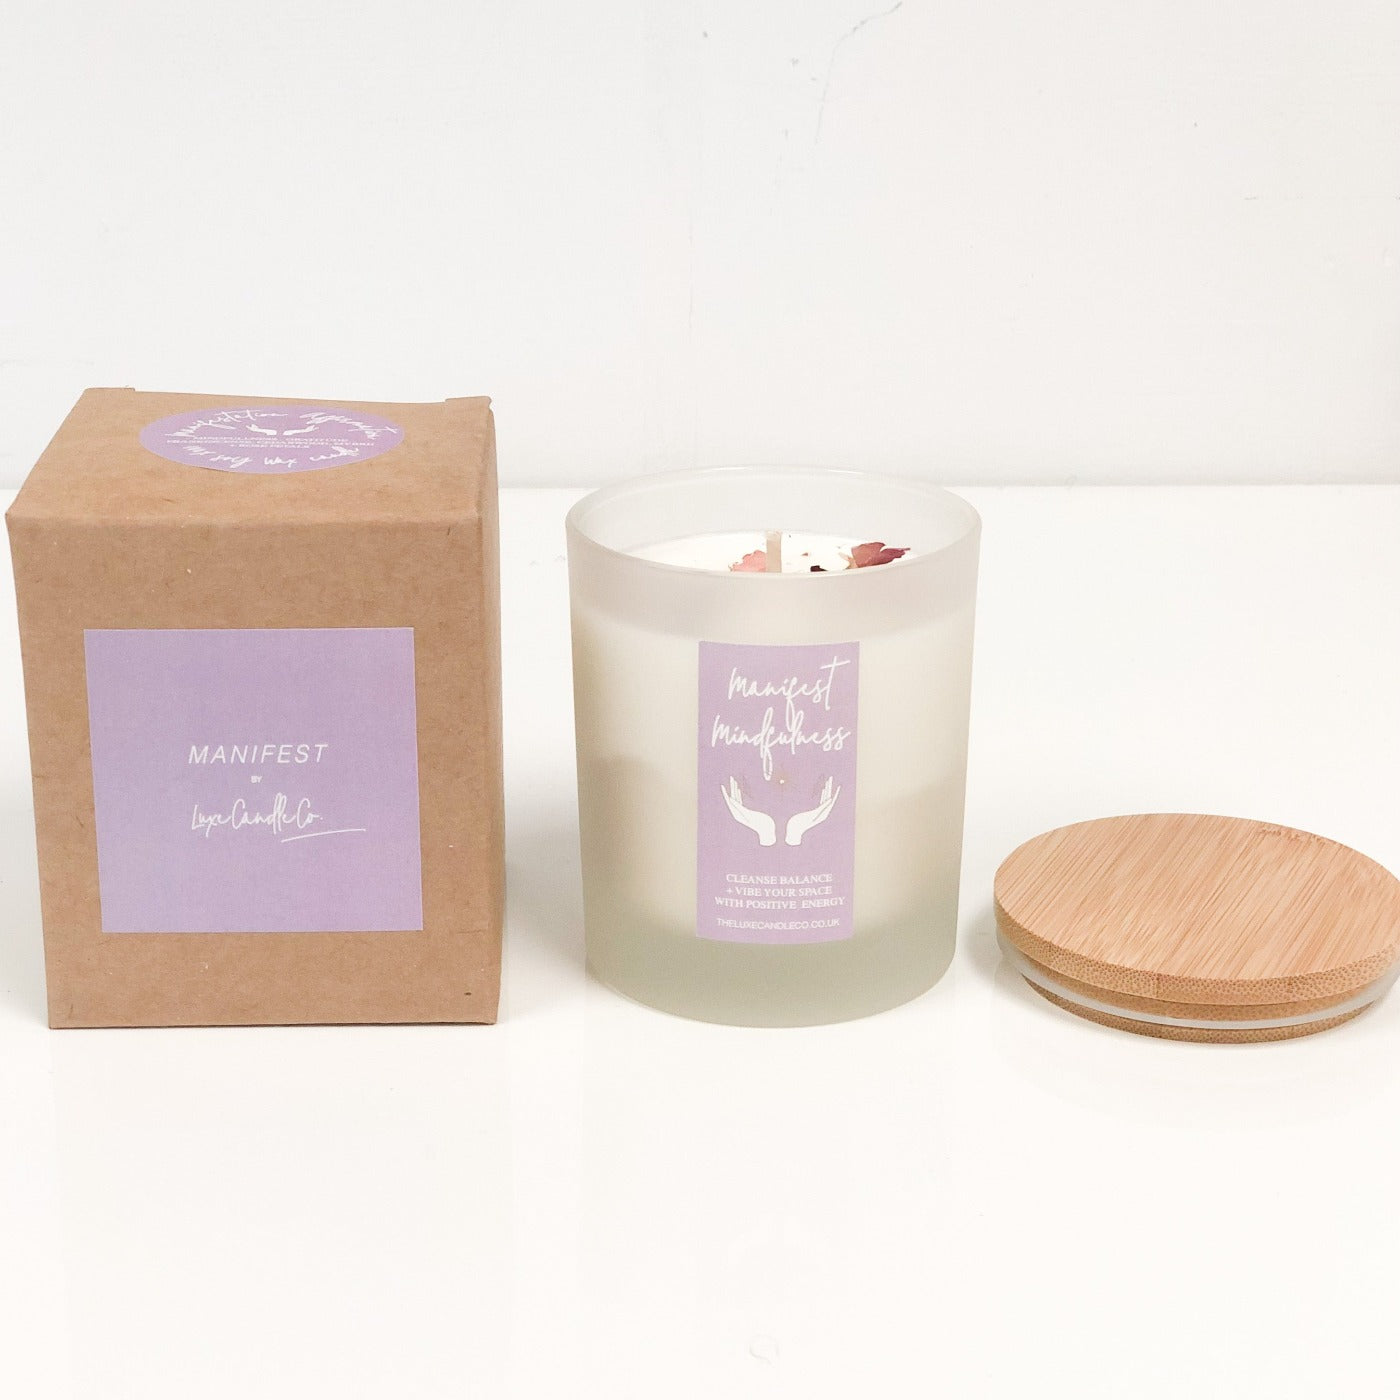 Mindfulness candles to practice gratitude, mindfulness to manifest the life you deserve | The Luxe Candle Co.